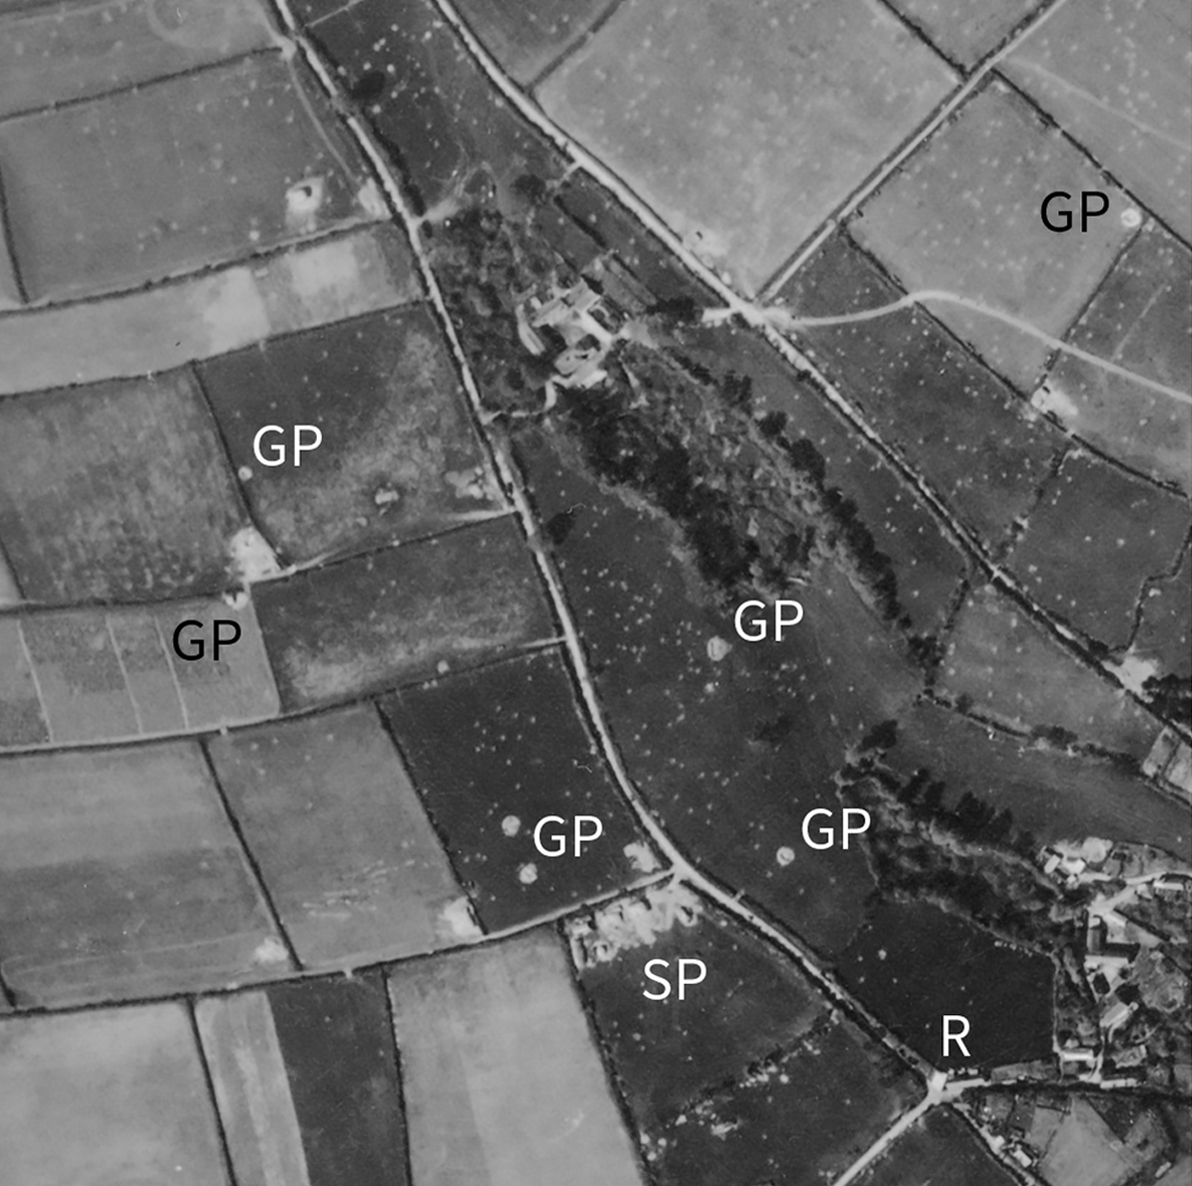 Detail from a black and white vertical aerial photograph, showing a patchwork landscape of fields, hedges, roads and tracks. In the centre of the image and in the bottom-right corner are buildings. The fields are pockmarked with shell holes. The letters 'R', 'SP' and 'GP' applied to the image mark locations